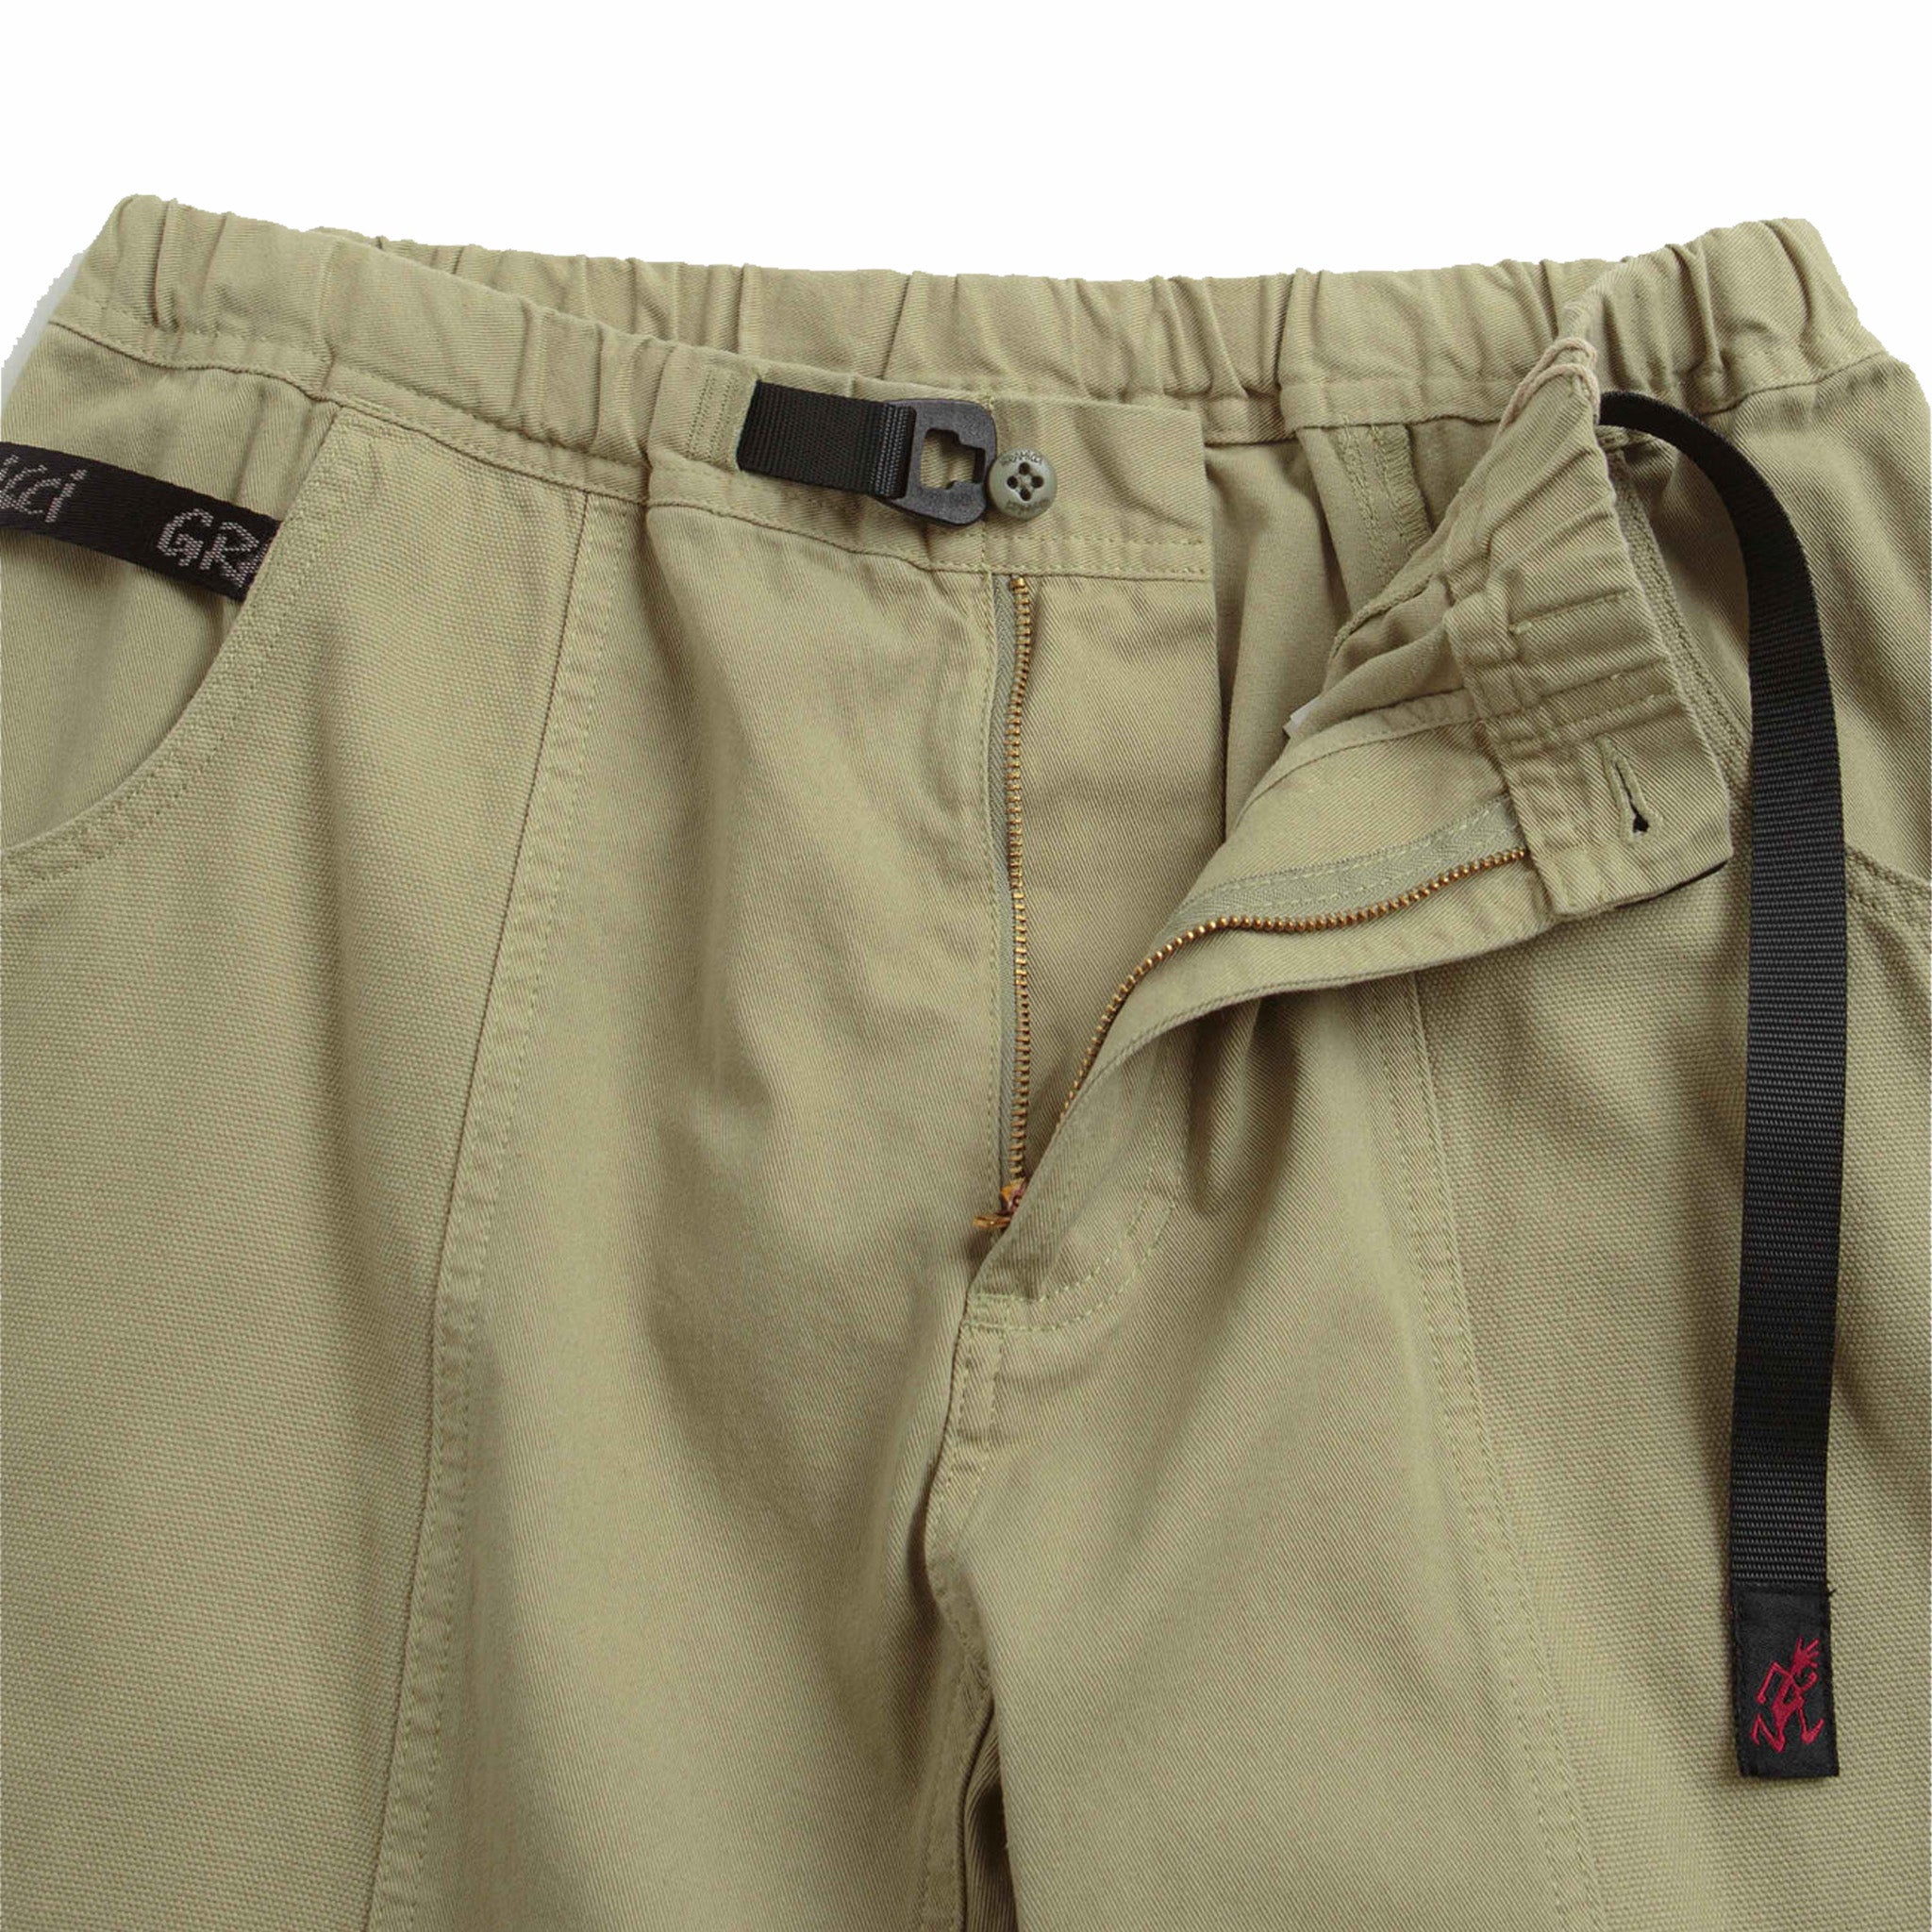 Gramicci Gadget Pant (Faded Olive) - August Shop